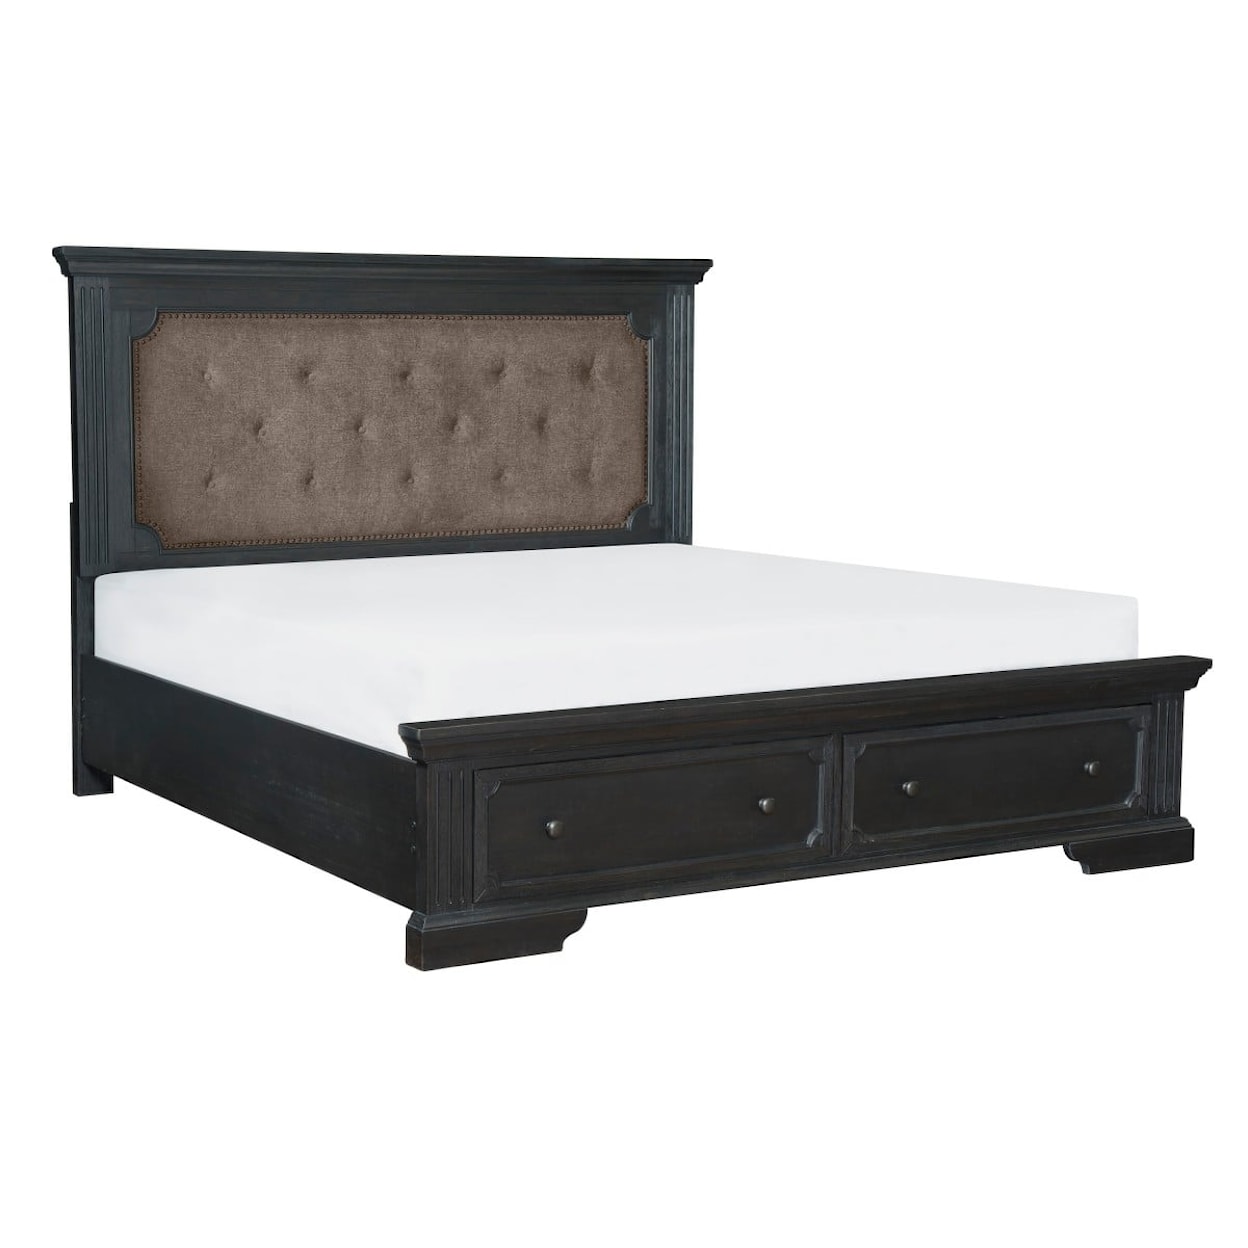 Homelegance Bolingbrook King  Bed with FB Storage